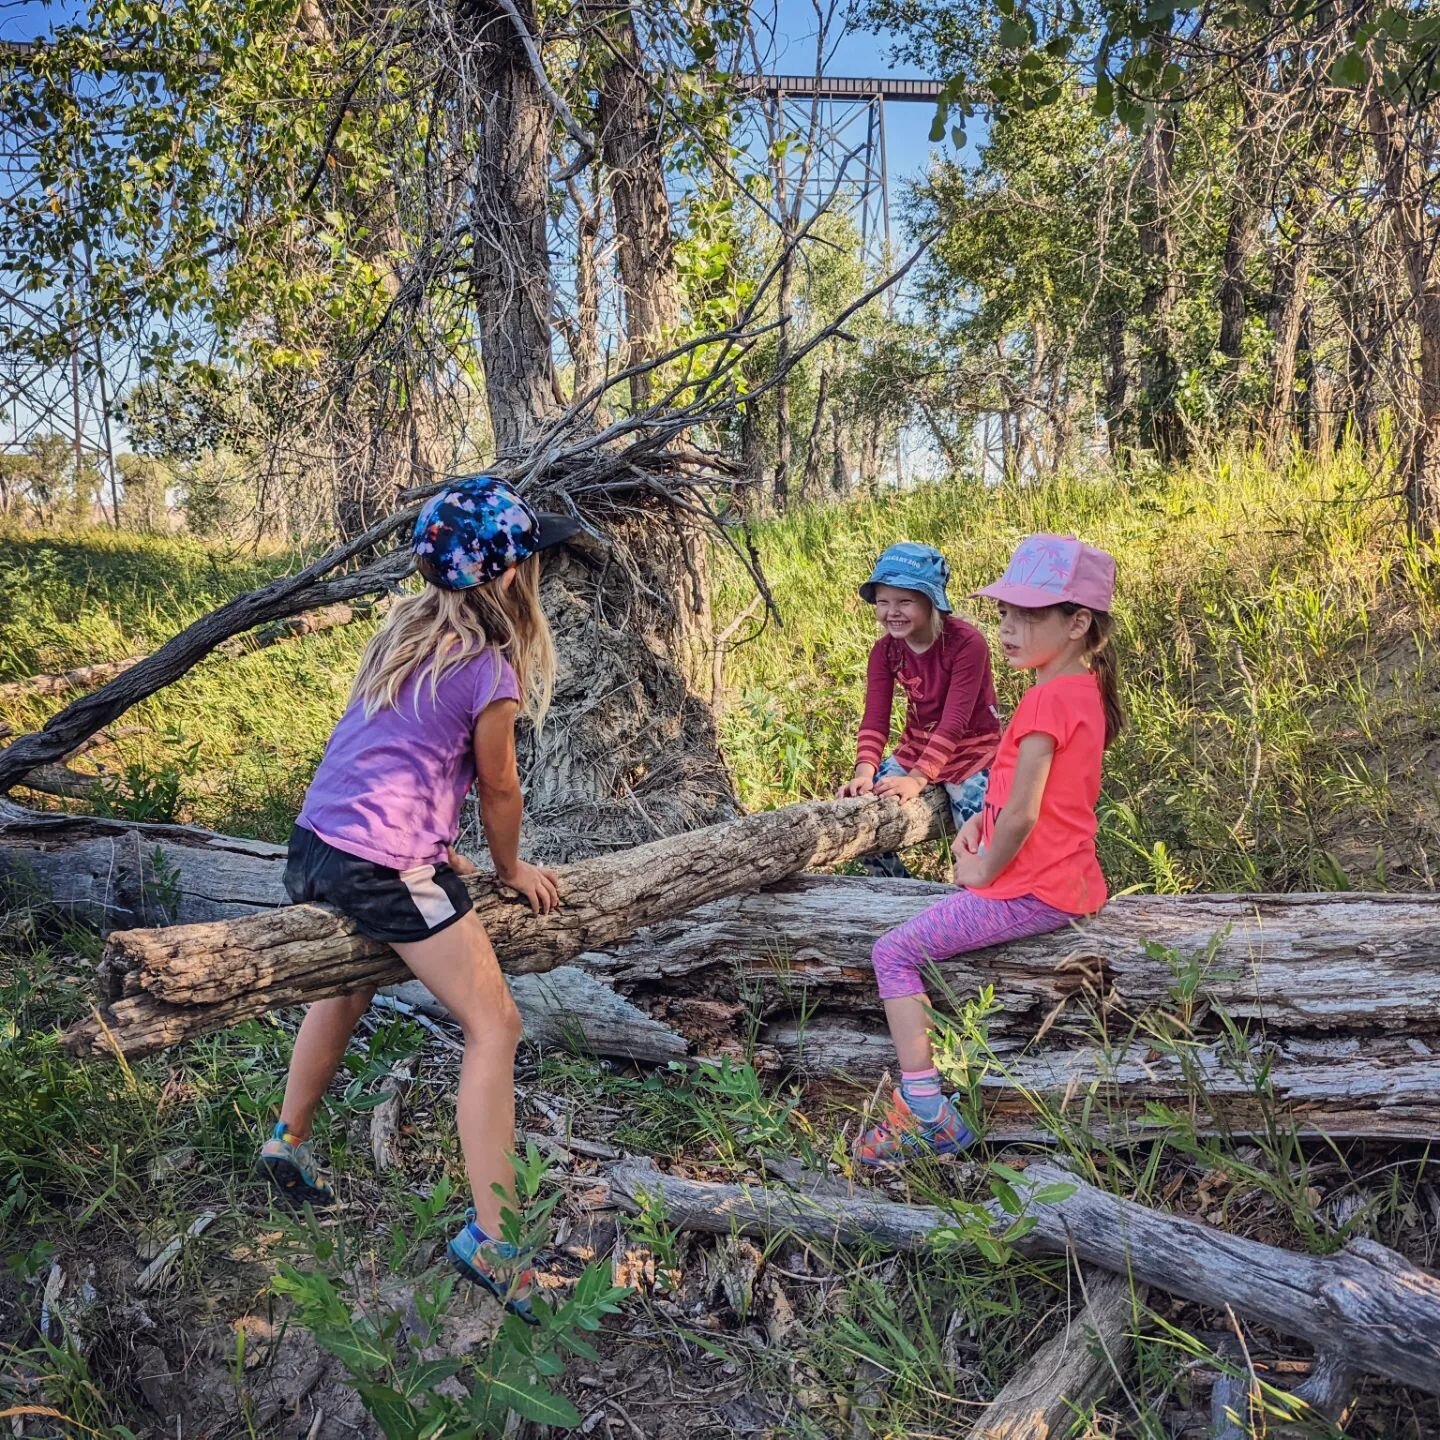 Restore balance. Most kids have technology, school and extracurricular activities covered. It's time to add a pinch of adventure, a sprinkle of sunshine and a big handful of outdoor play. //Penny Whitehouse

Join us this fall to get all of that! Adve